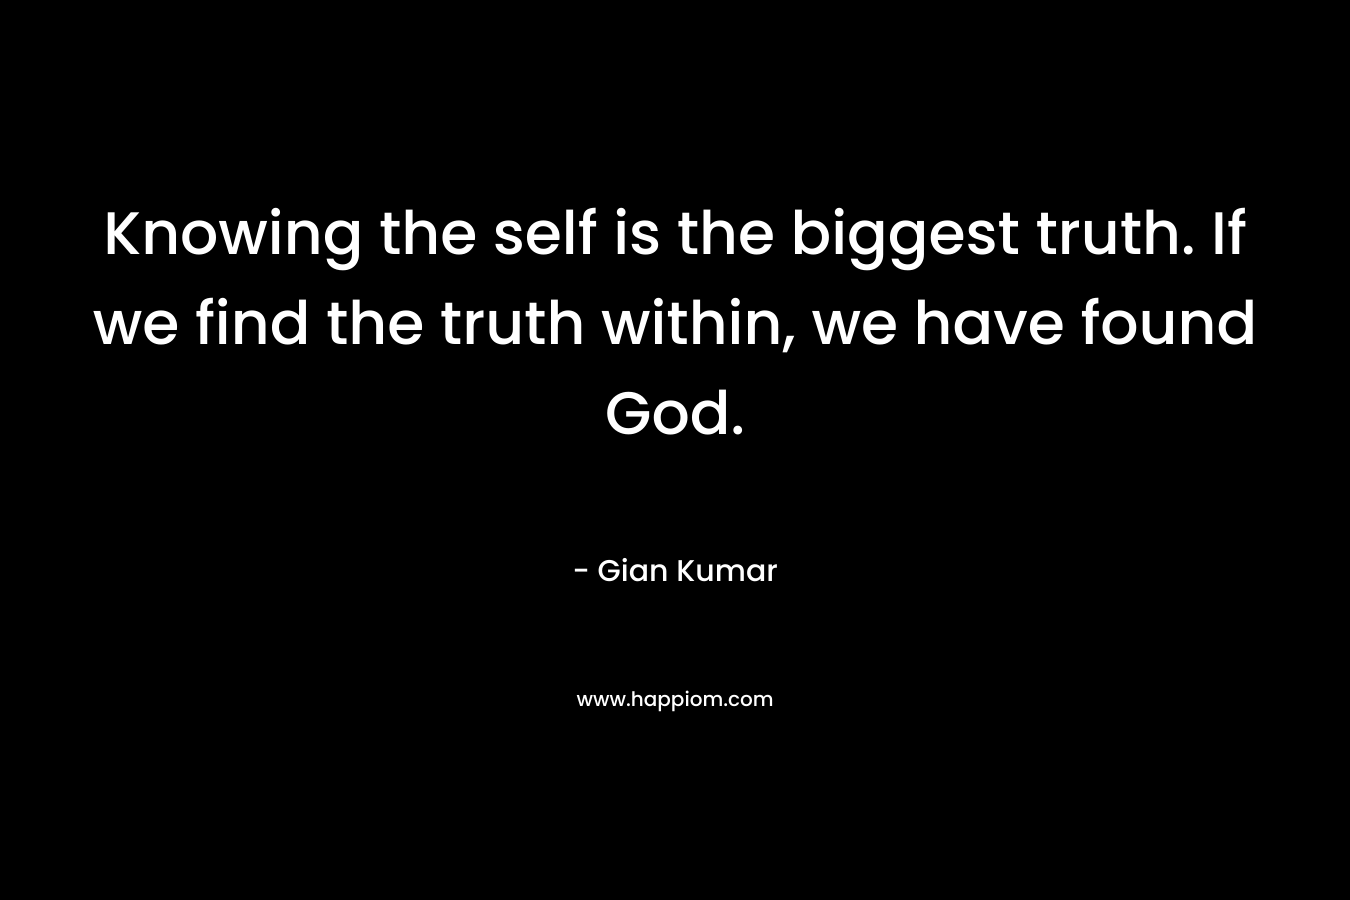 Knowing the self is the biggest truth. If we find the truth within, we have found God. – Gian Kumar